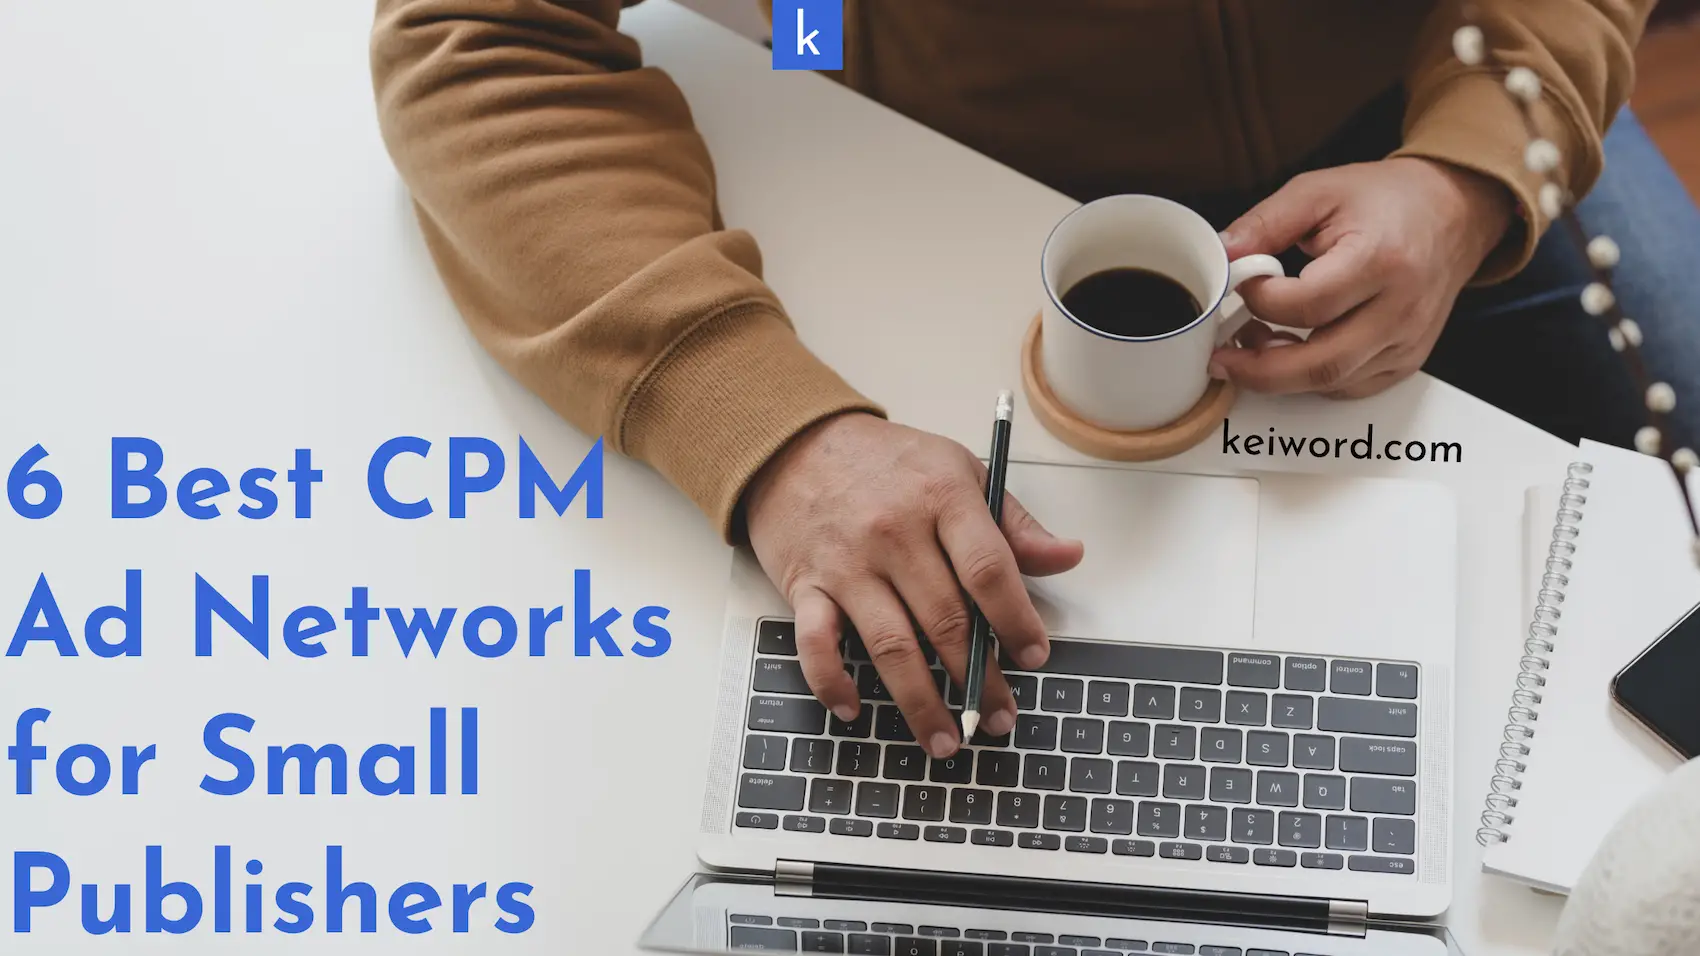 6 Best CPM Ad Networks for Small Publishers